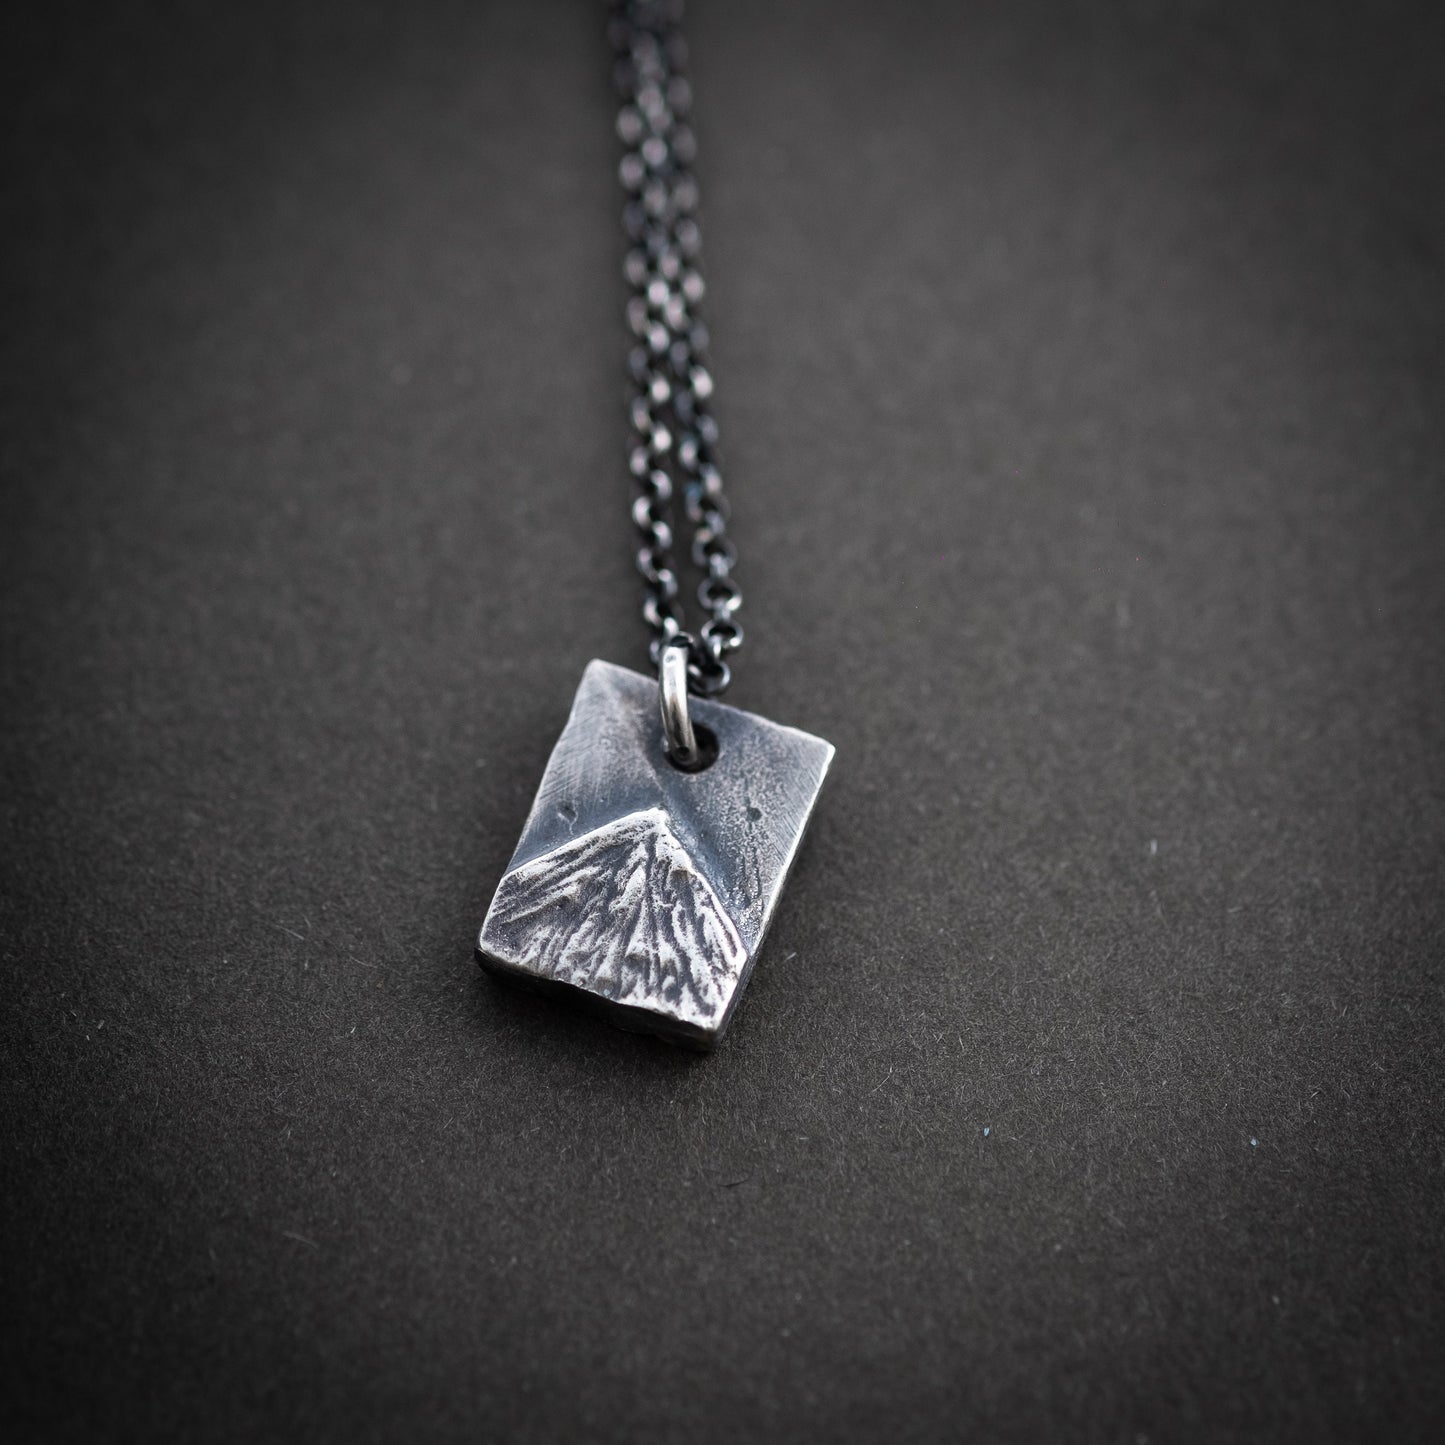 Mountain Silver Necklace, Wanderlust Hiking Adventure necklace, Travel Gifts, Mens pendant necklace, Handmade Nature jewelry